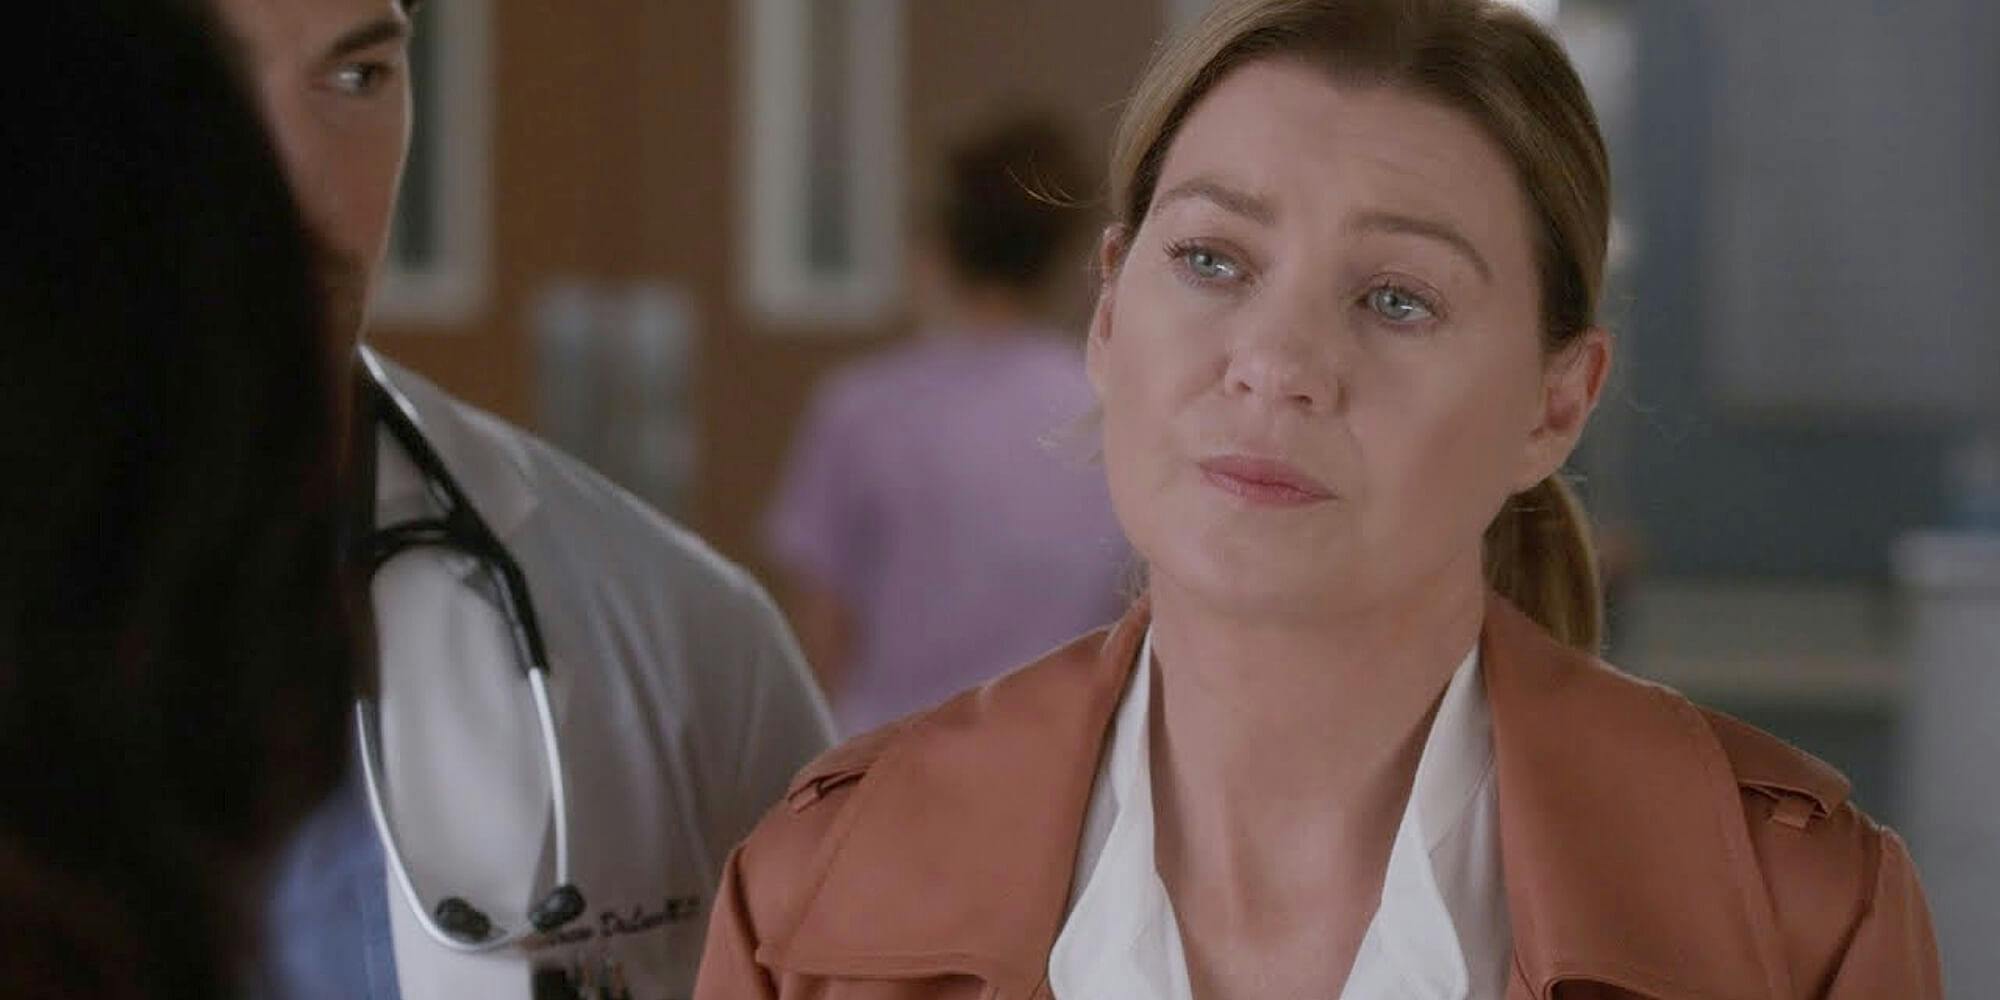 When Does 'Grey's Anatomy' Return? Everything You Need To Know